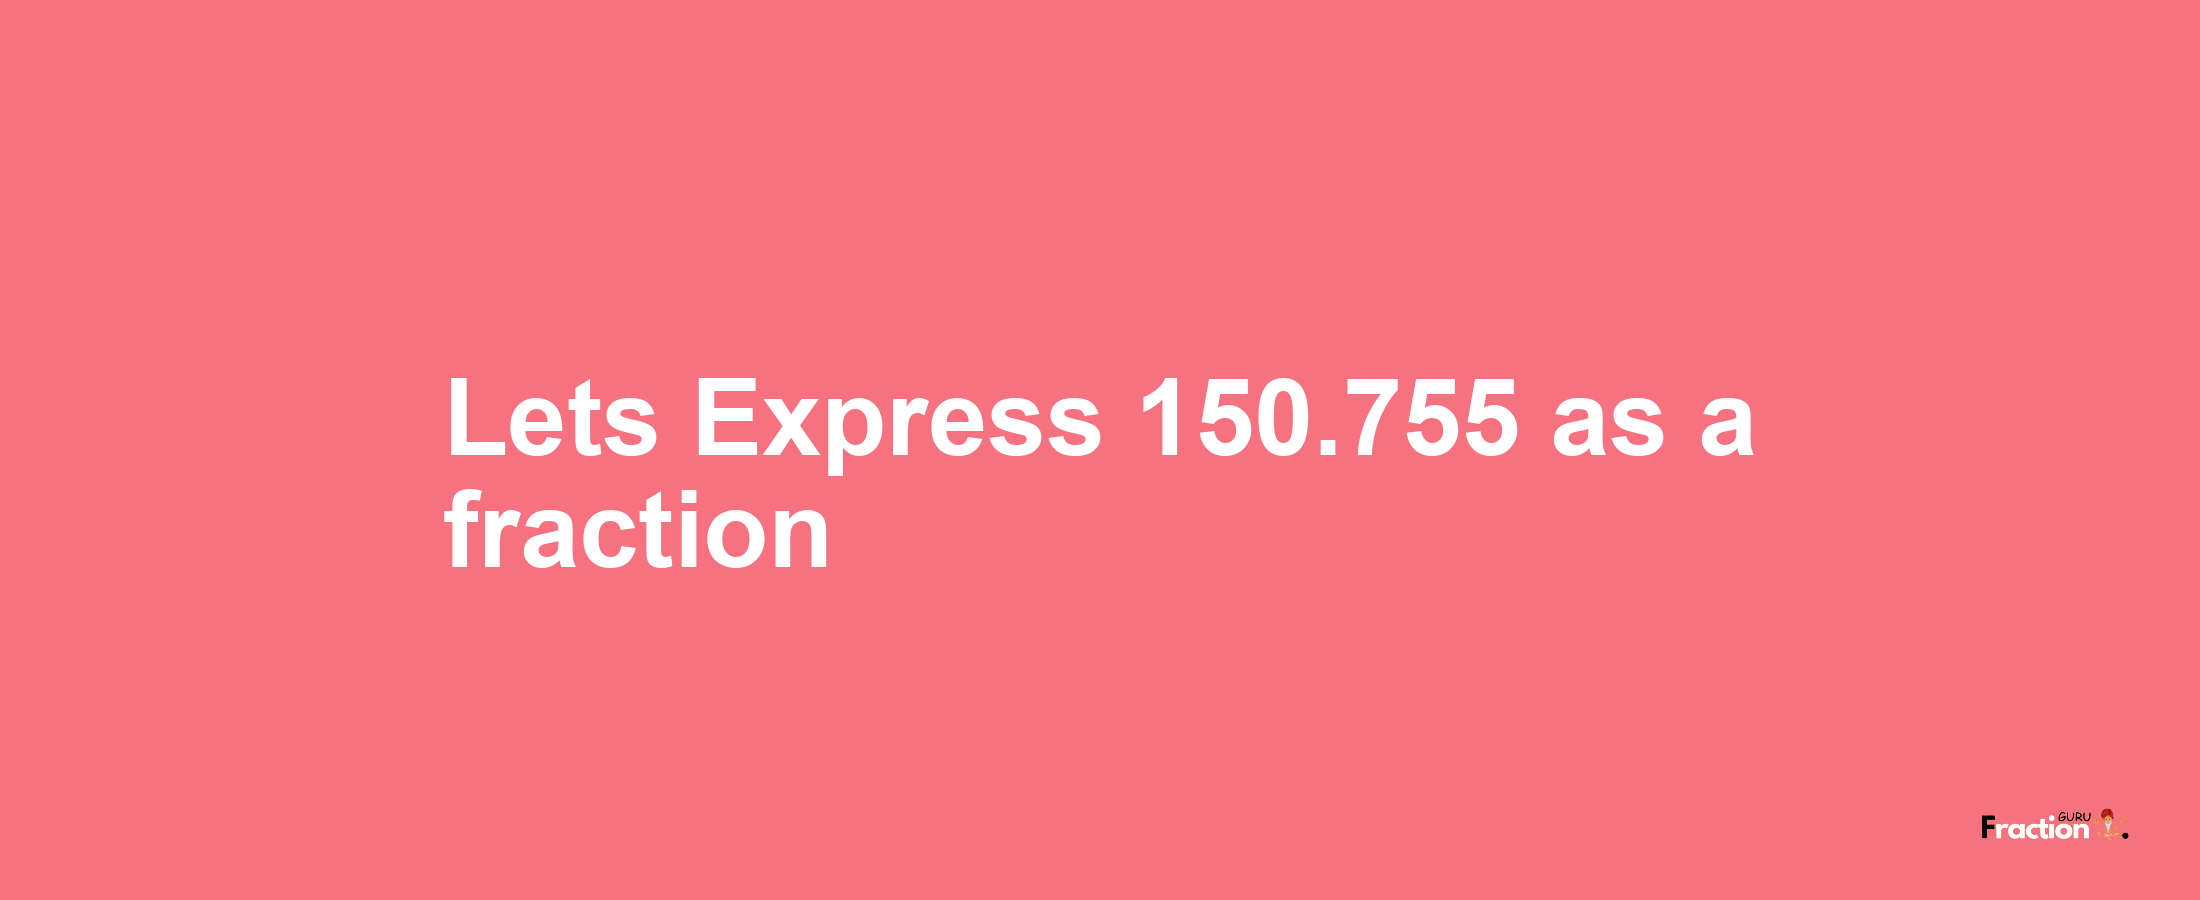 Lets Express 150.755 as afraction